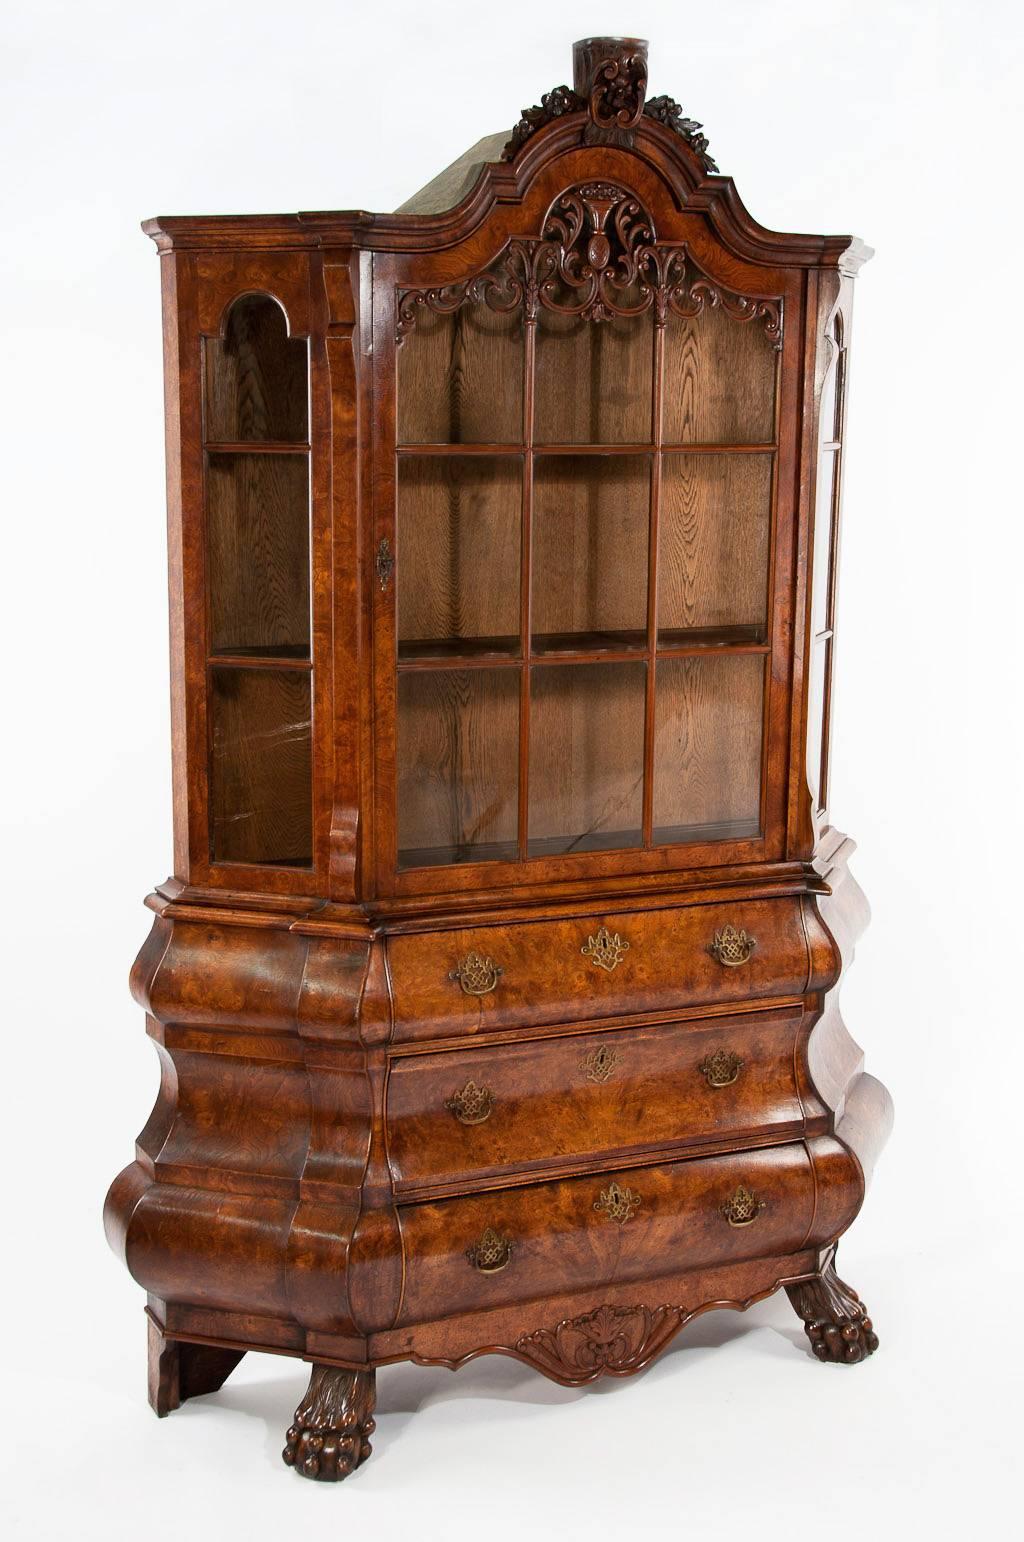 A wonderful late 19th Century antique burr elm Dutch Bombay bookcase / display cabinet. This lovely quality and well proportioned bookcase has obtained a delightful warm colour and patina with striking burr elm veneers. The shaped top having a